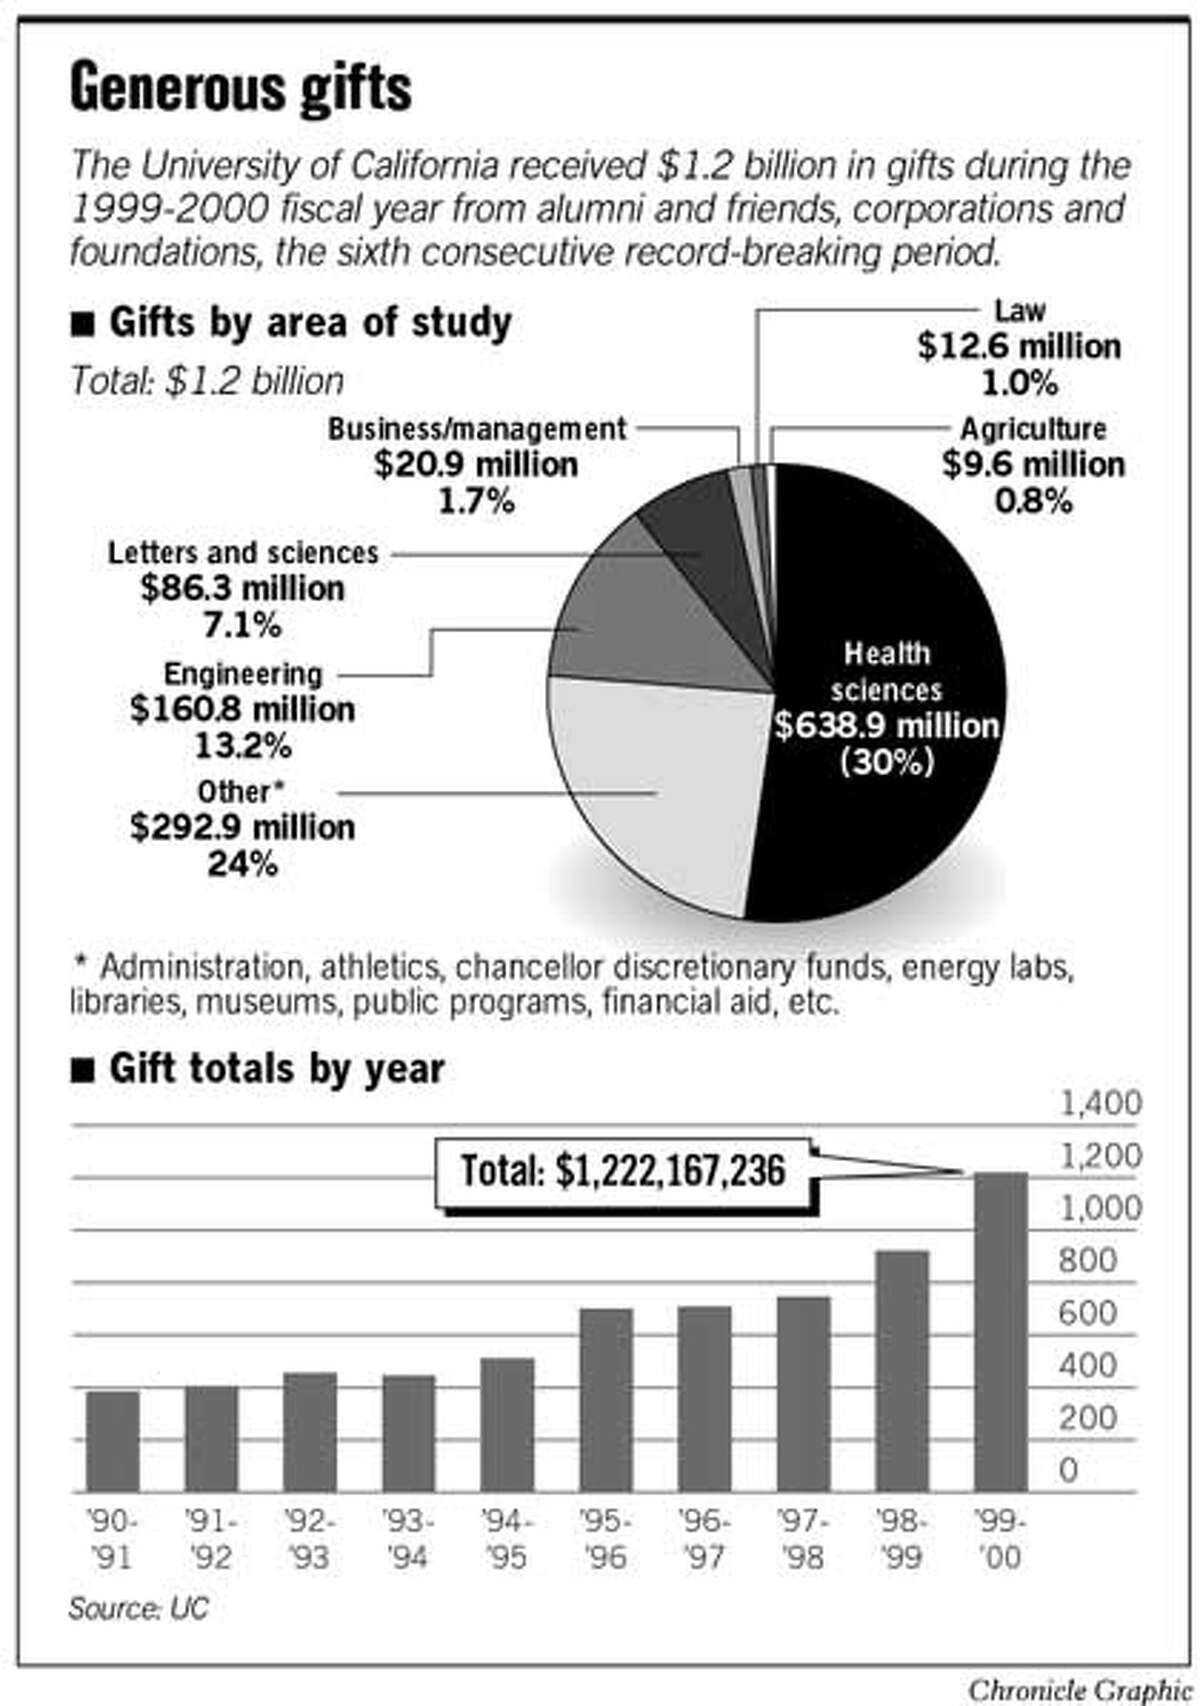 Generous Gifts. Chronicle Graphic